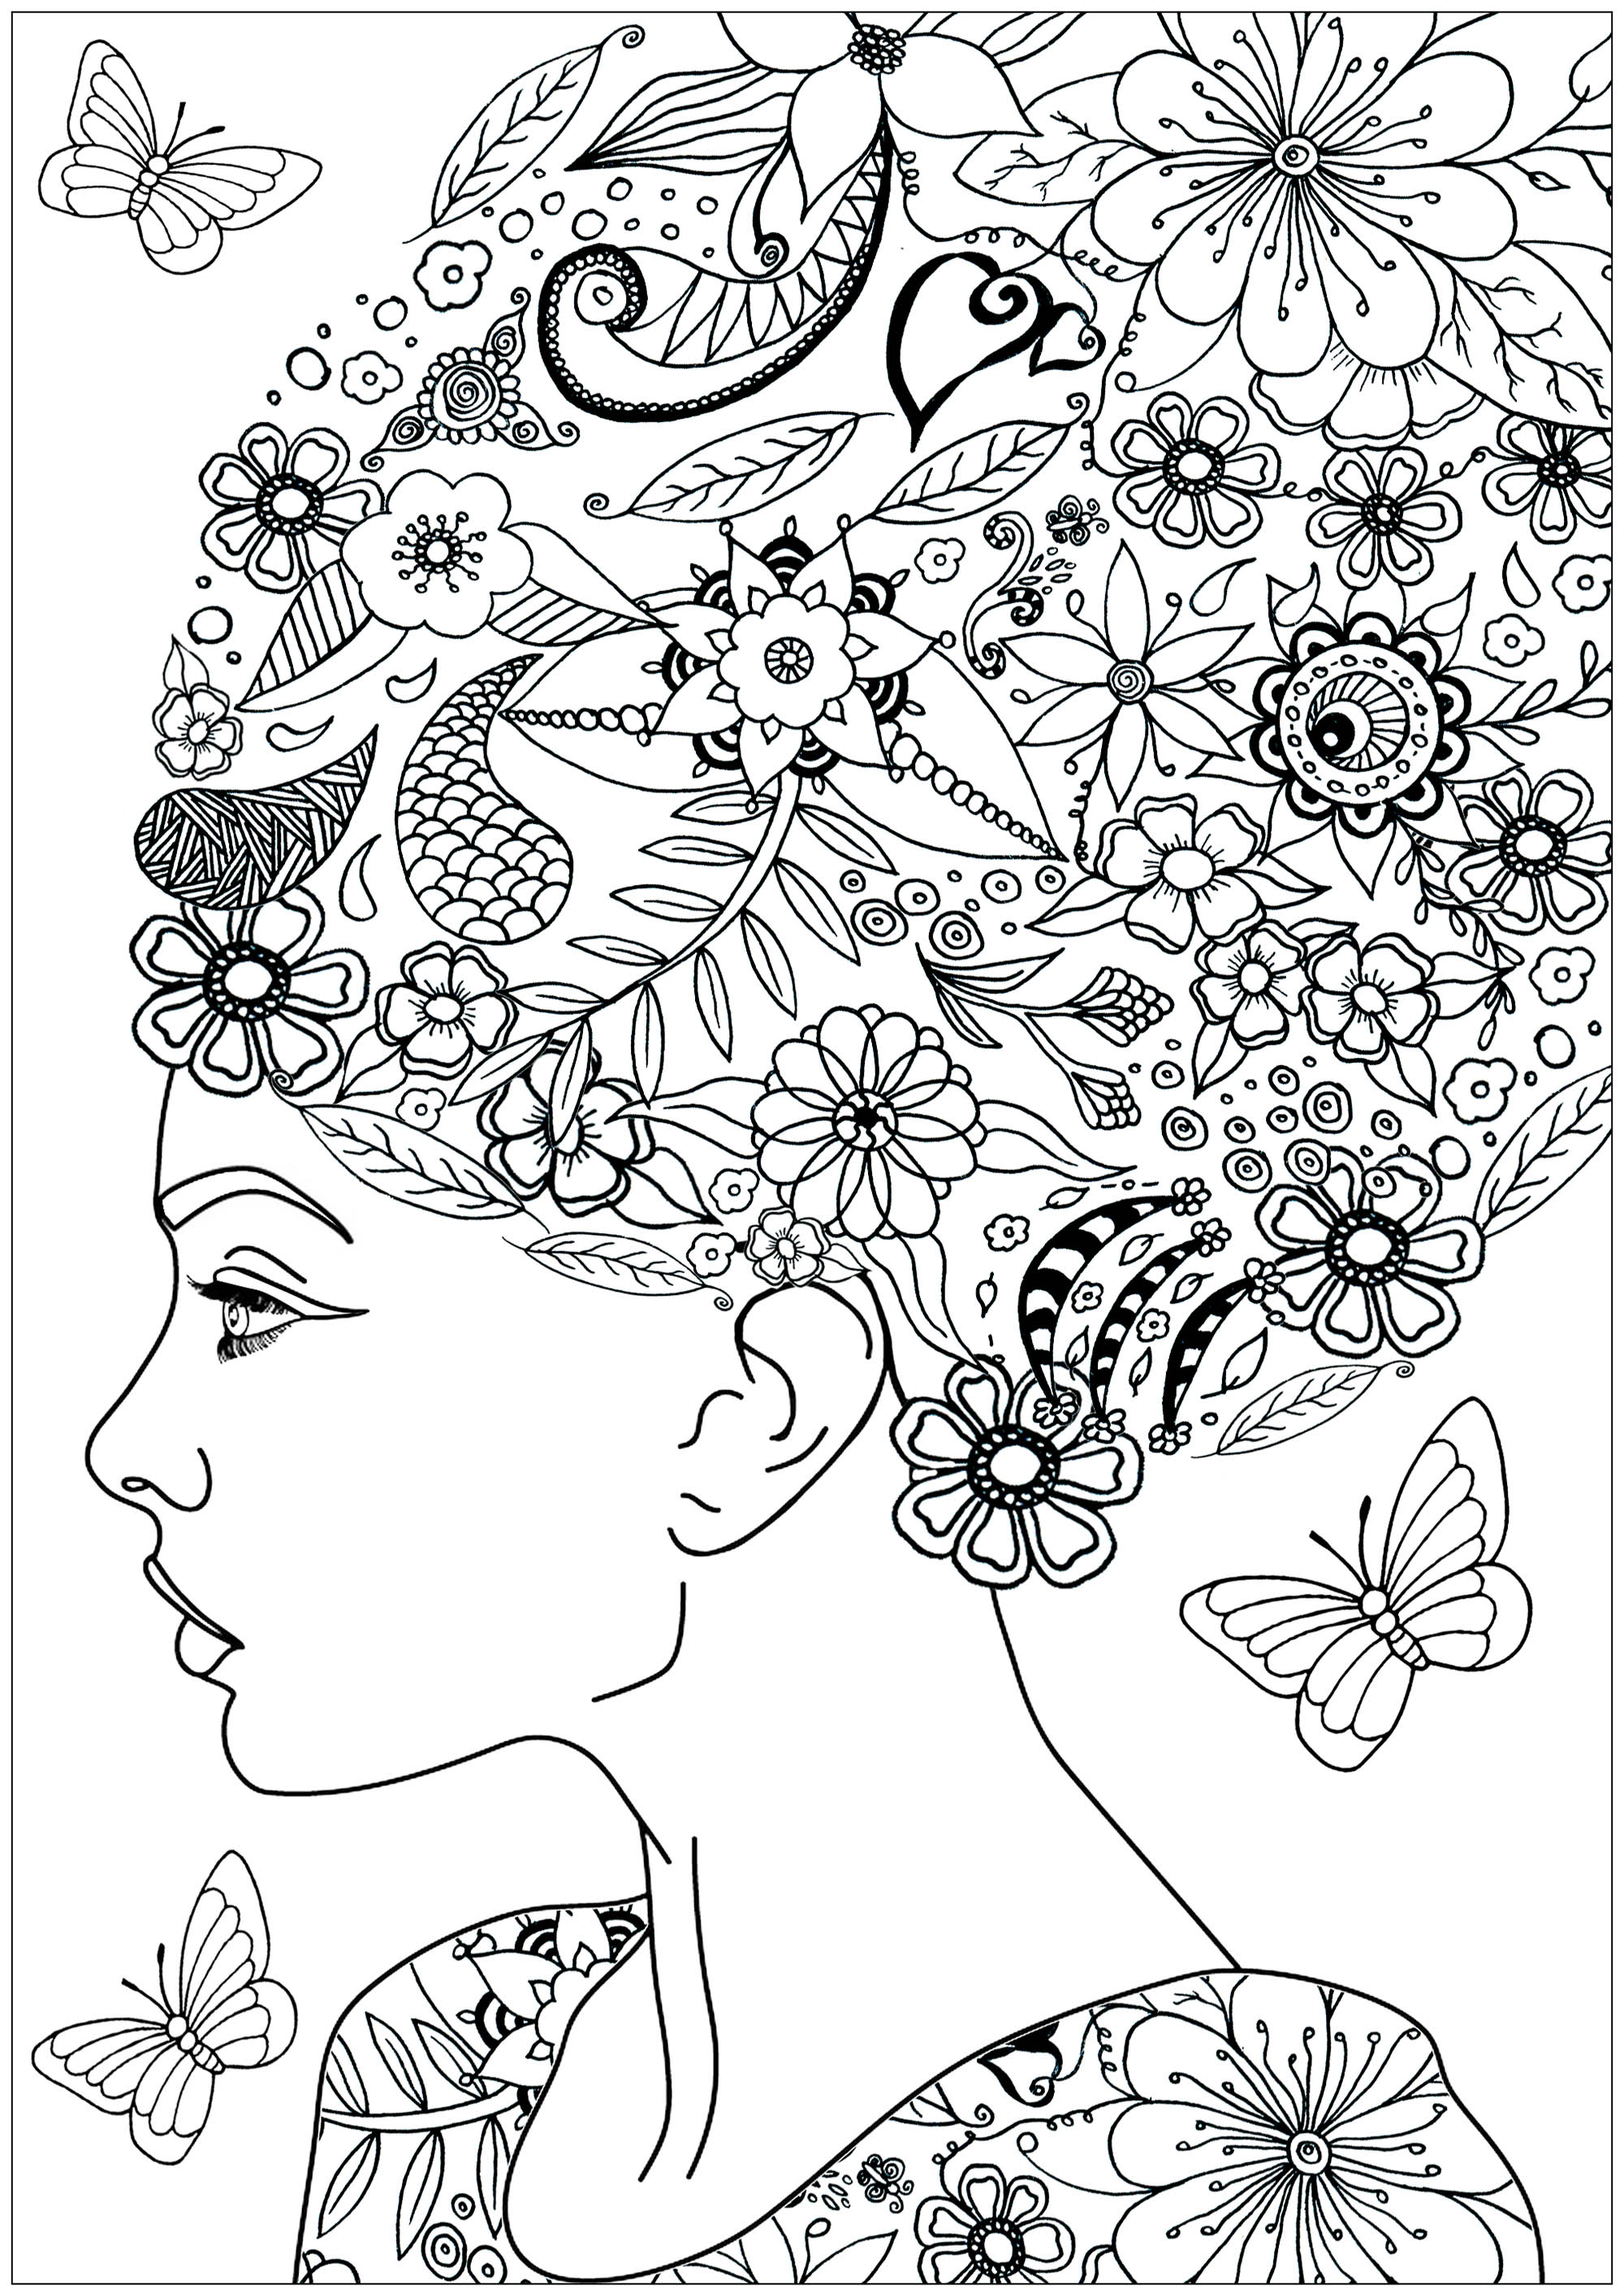 Woman with flowery hair - Flowers Adult Coloring Pages